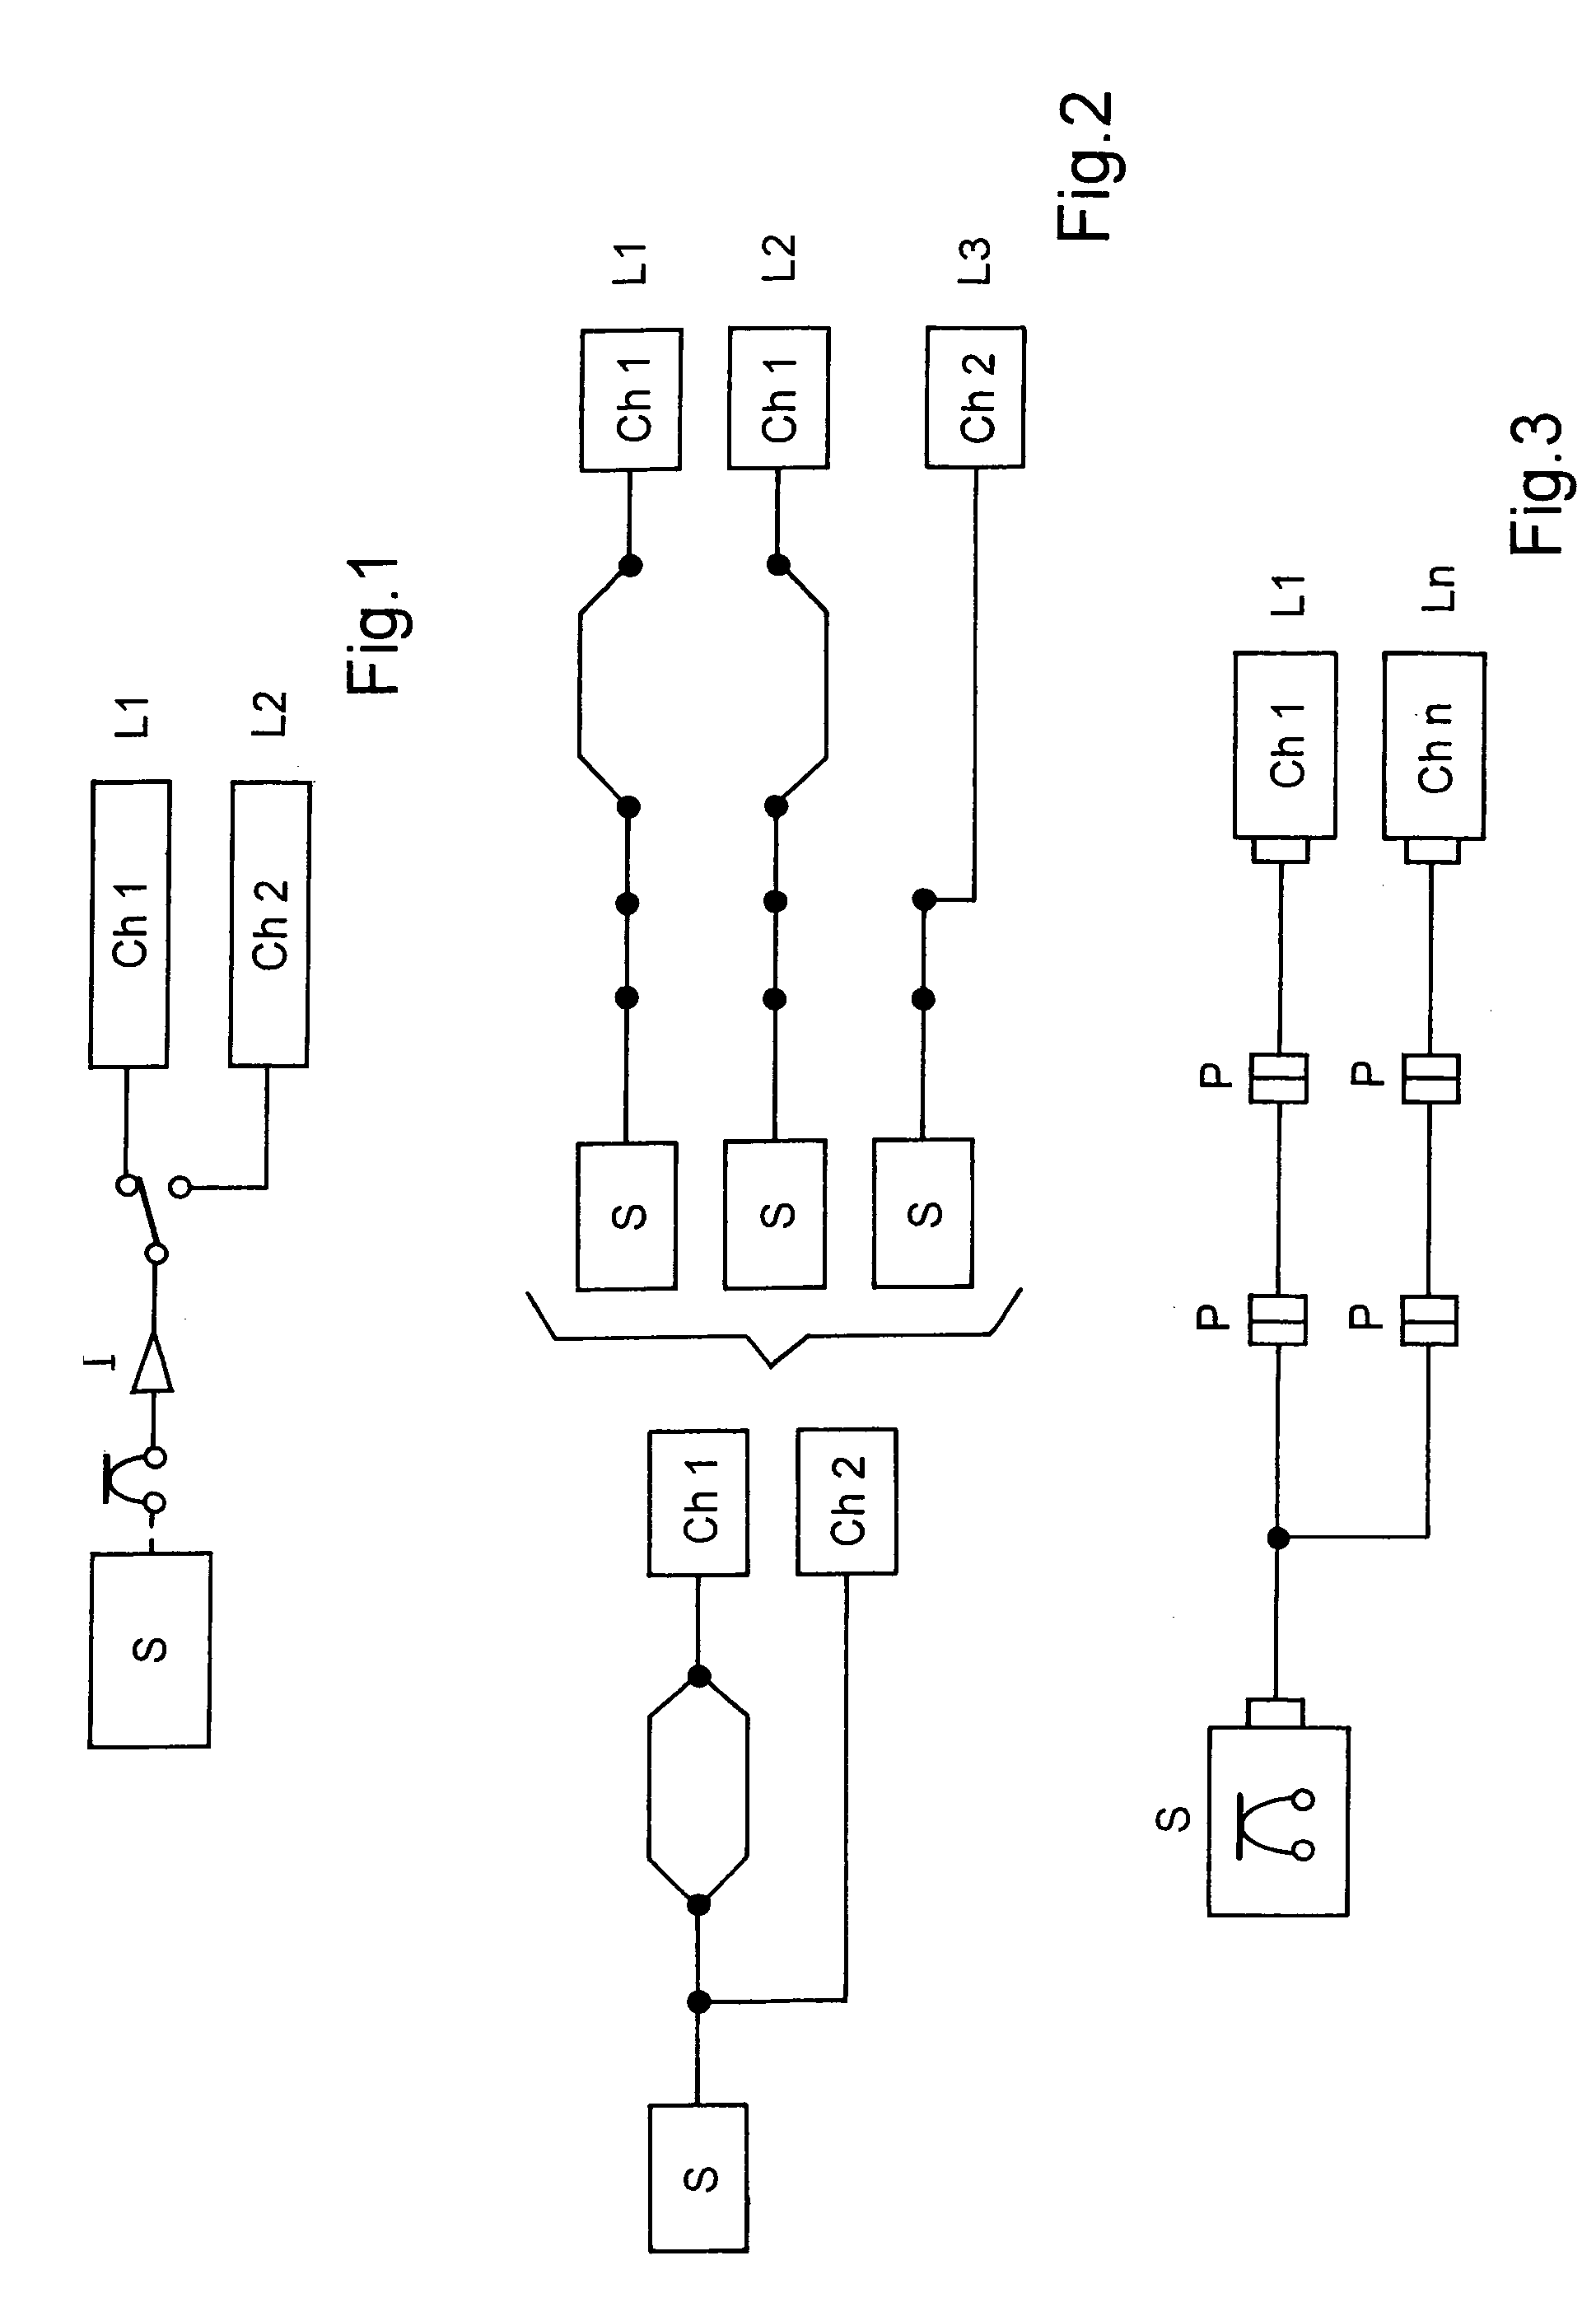 Method of optimizing an electrical cabling